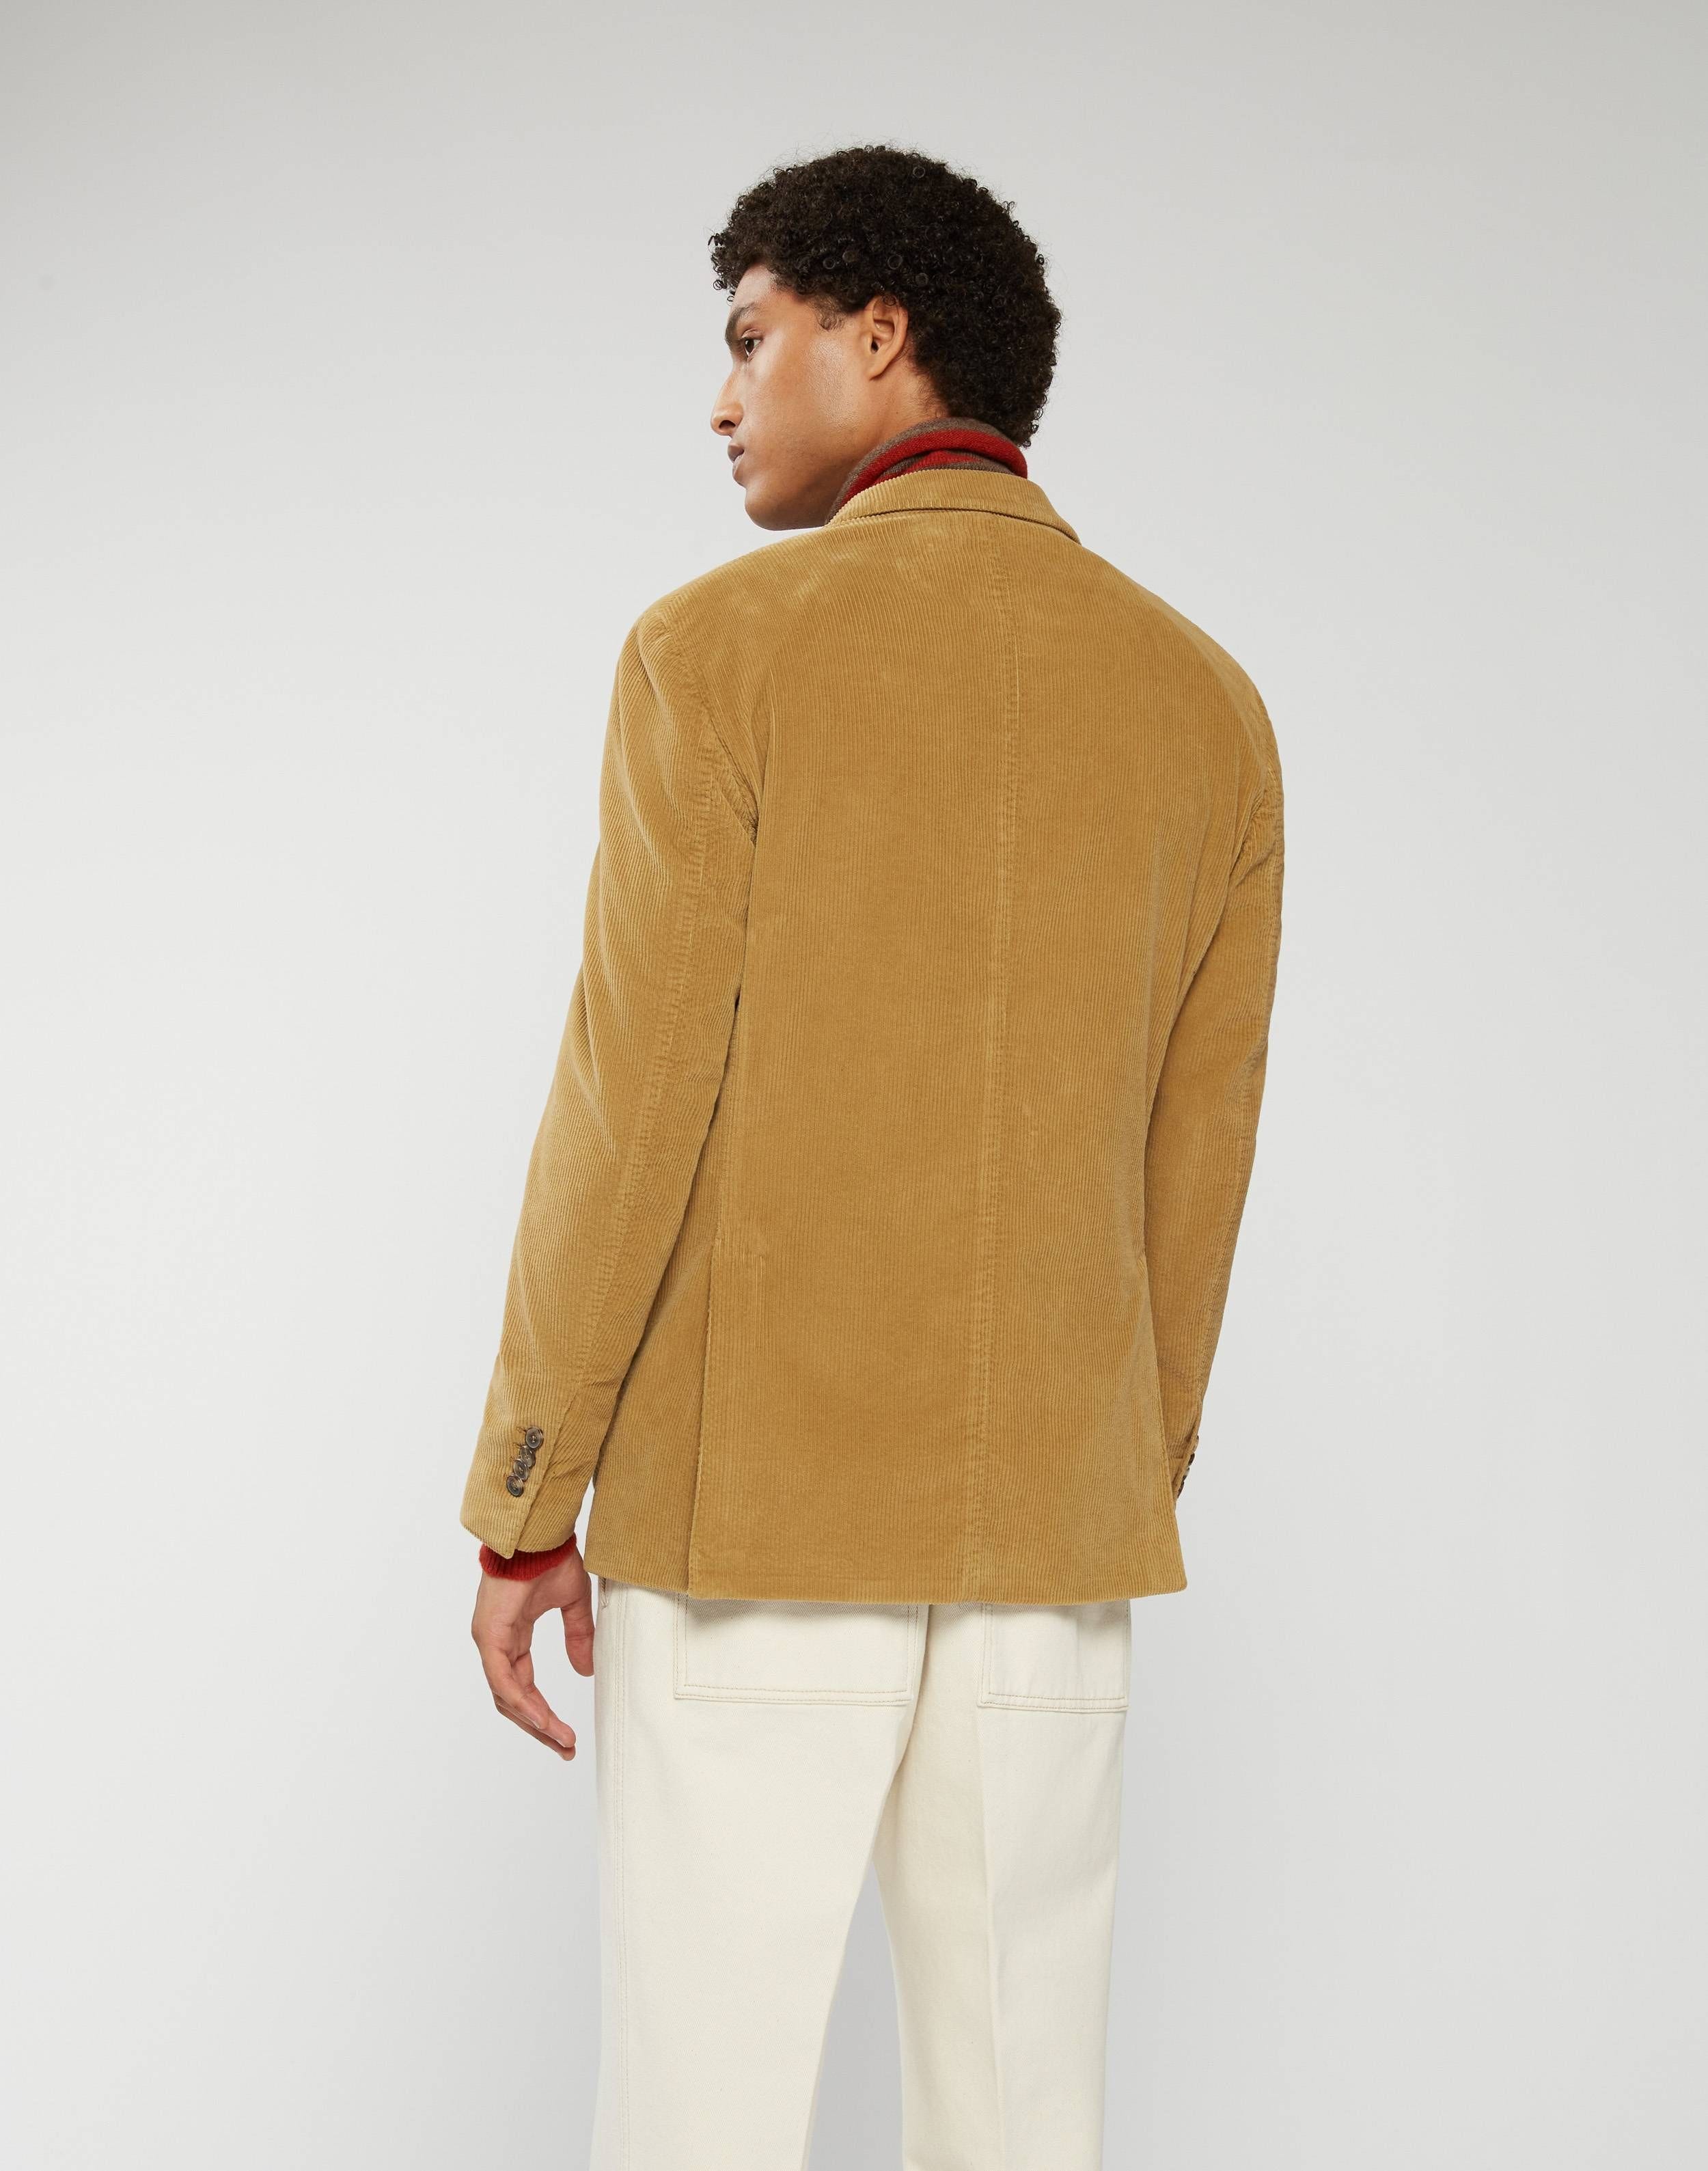 Jacket in camel-brown corduroy - Supersoft